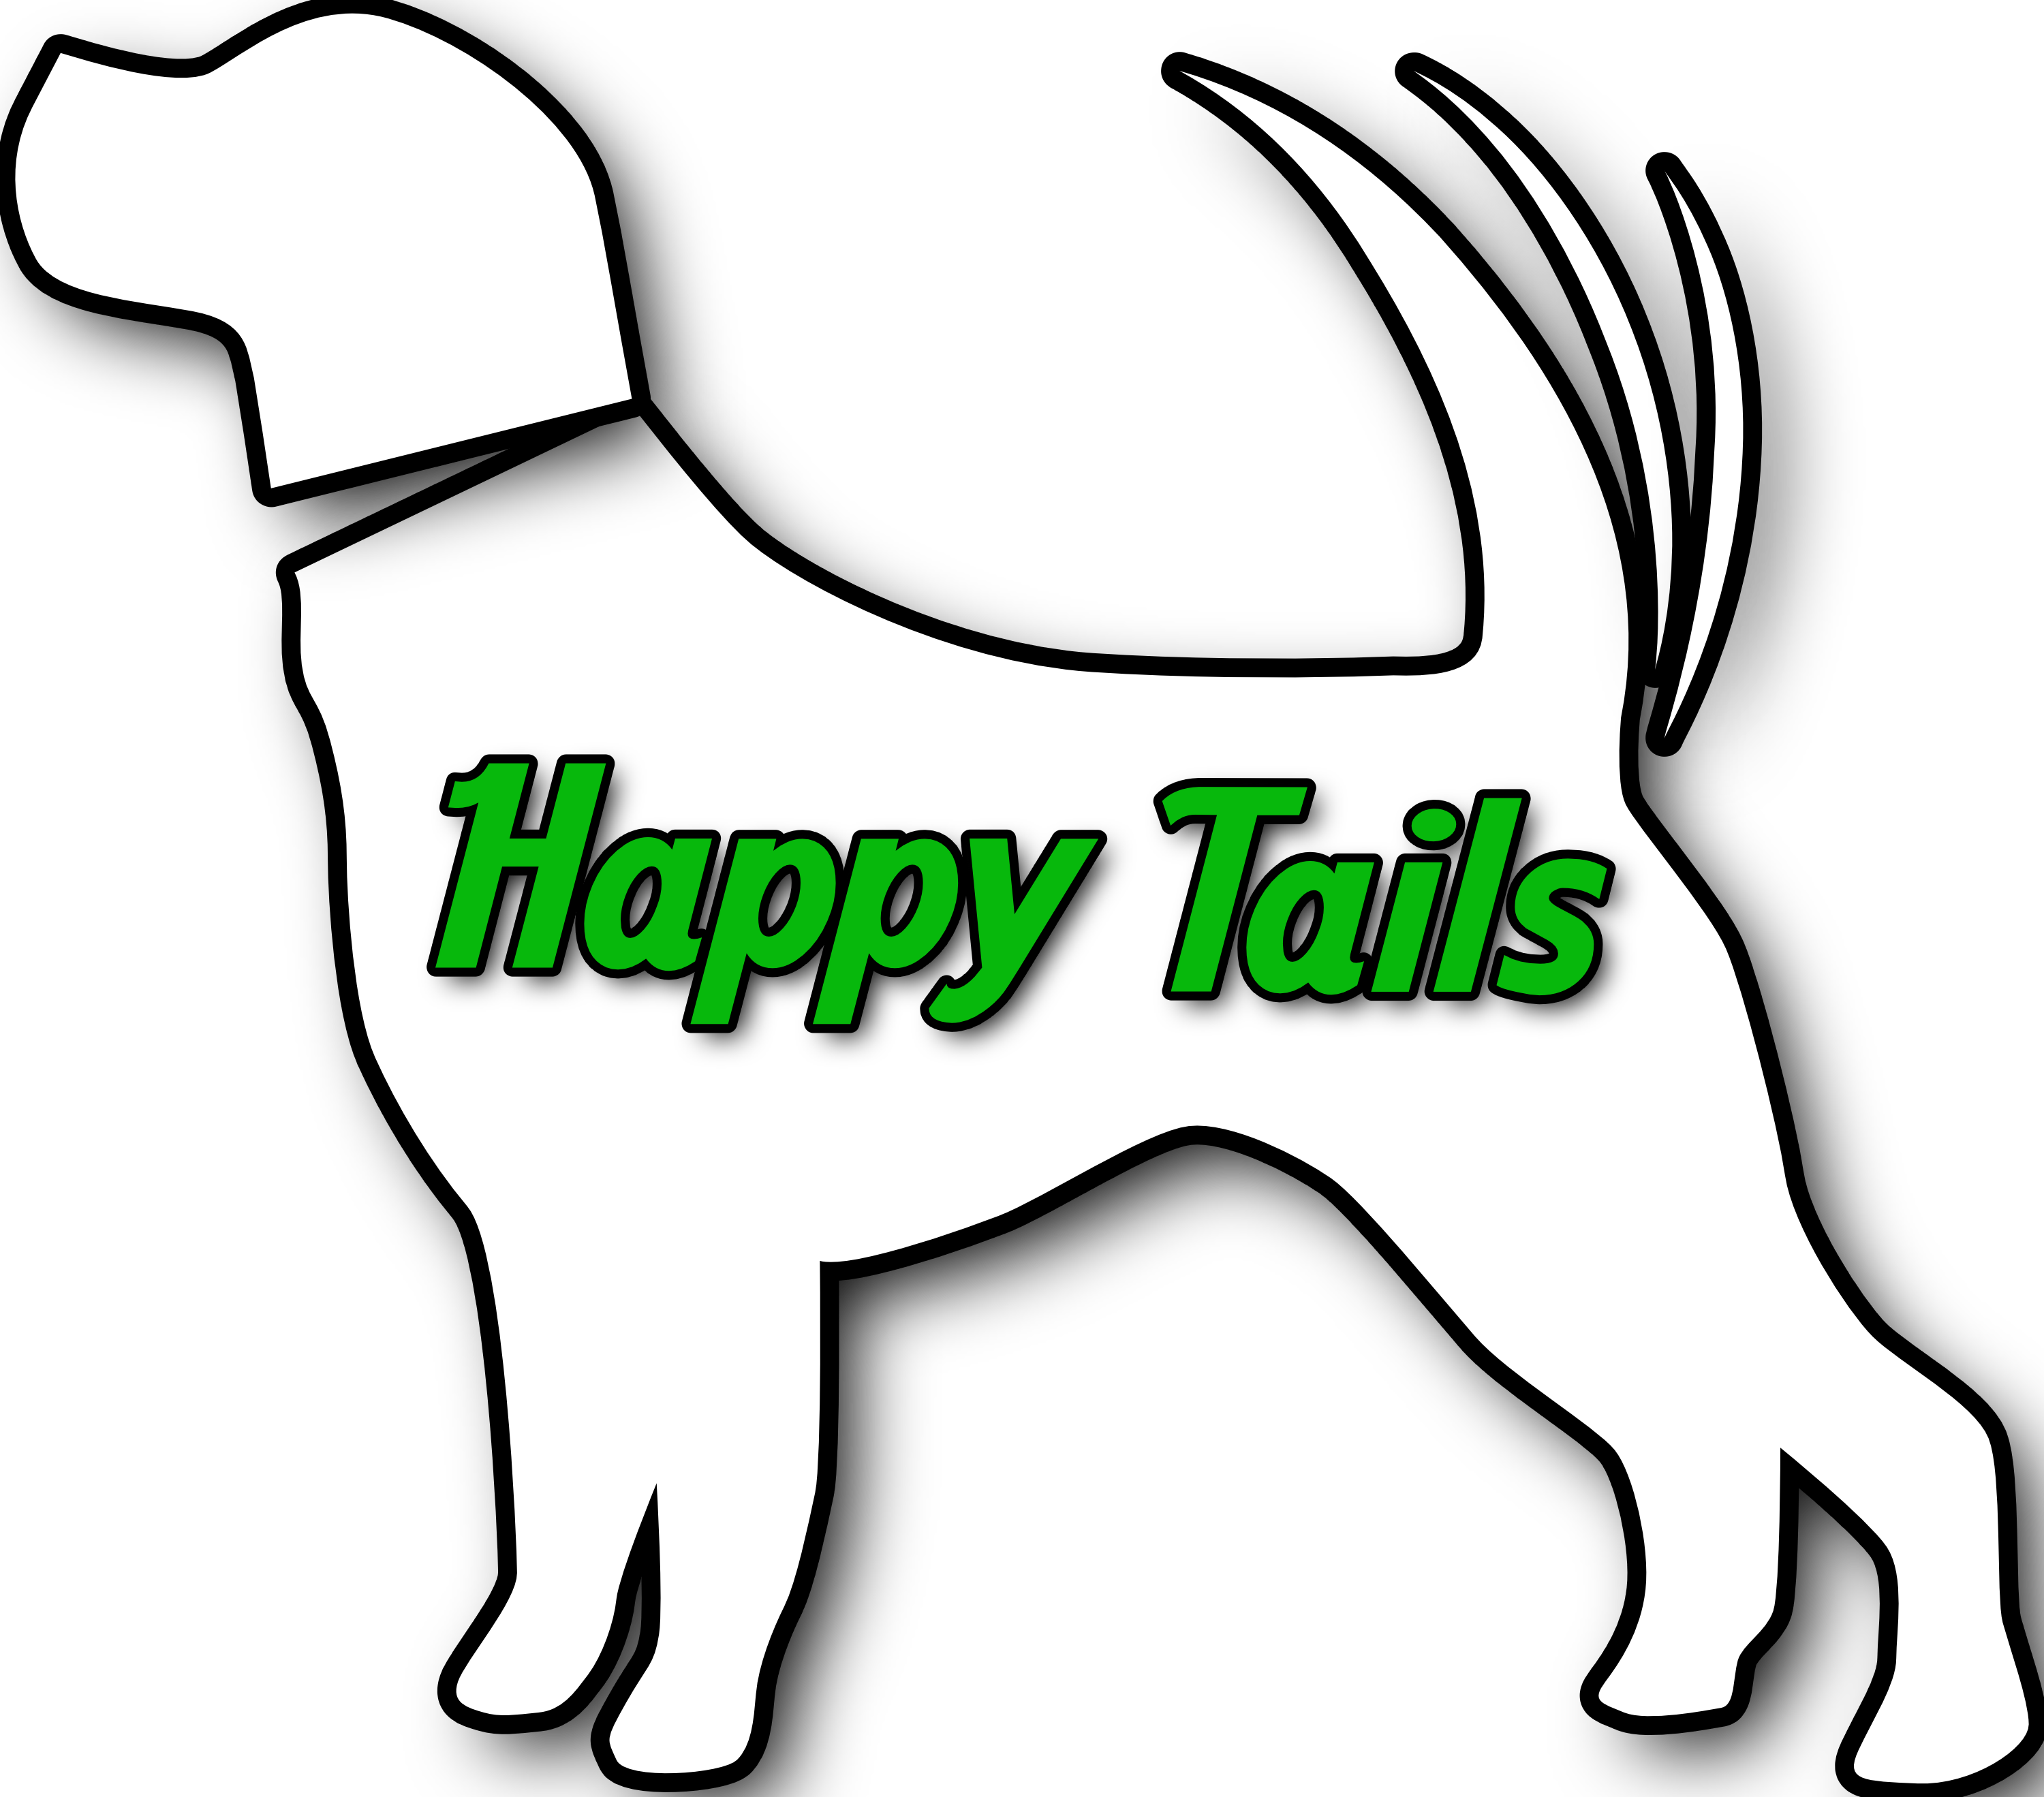 Happy Tails Kennel Dog Boarding, Grooming, And Training - Happy Tails Kennel Dog Boarding, Grooming, And Training (3000x2638)